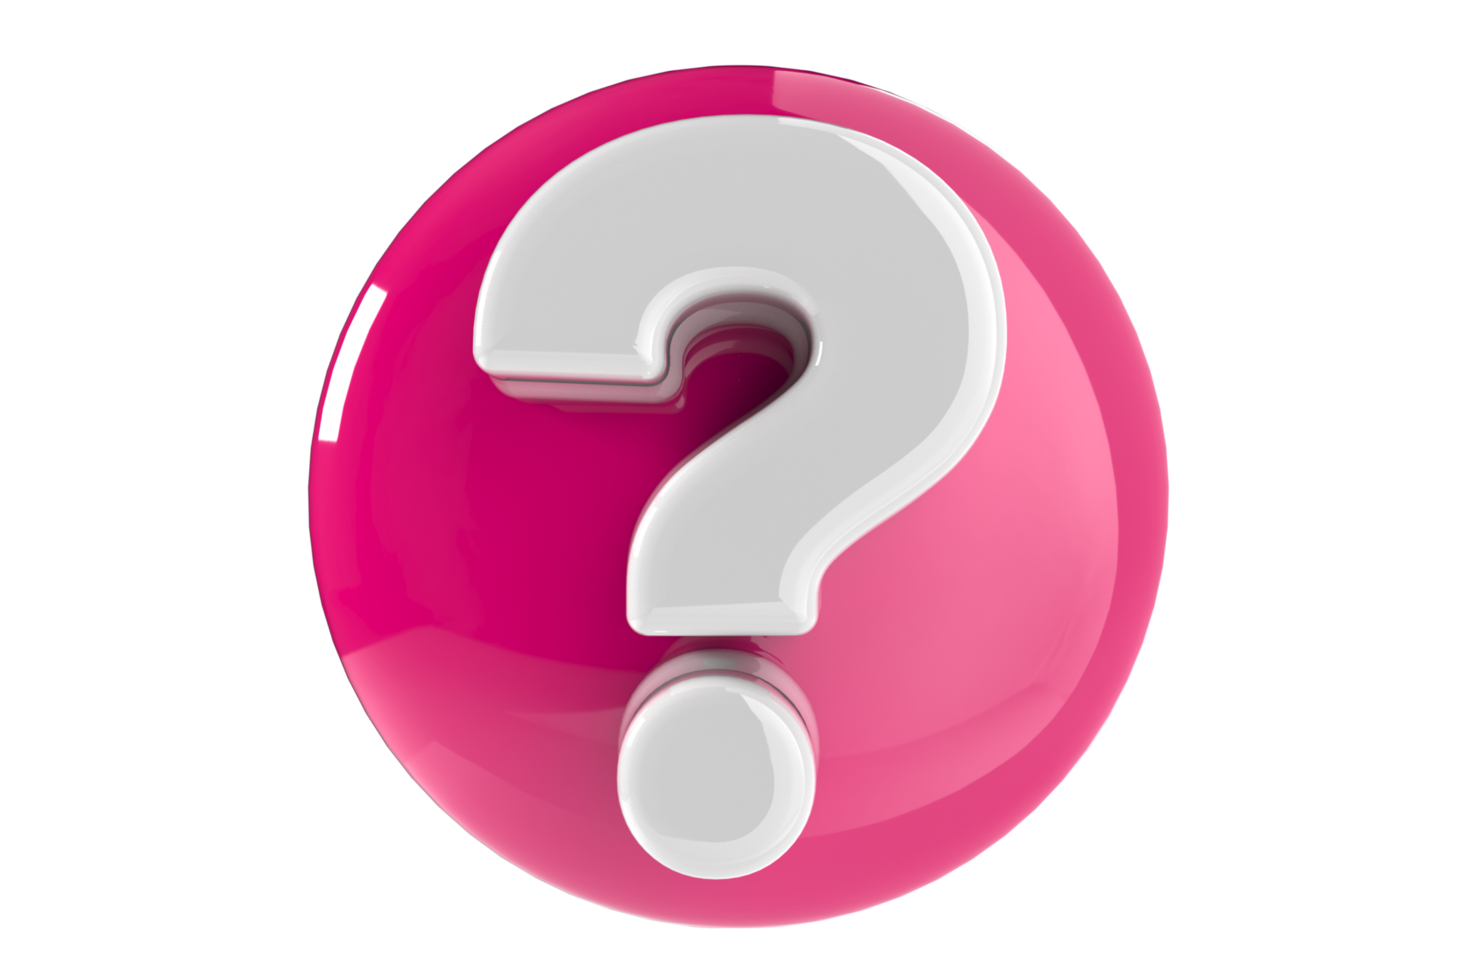 Volumetric 3d question mark on png Transprent background